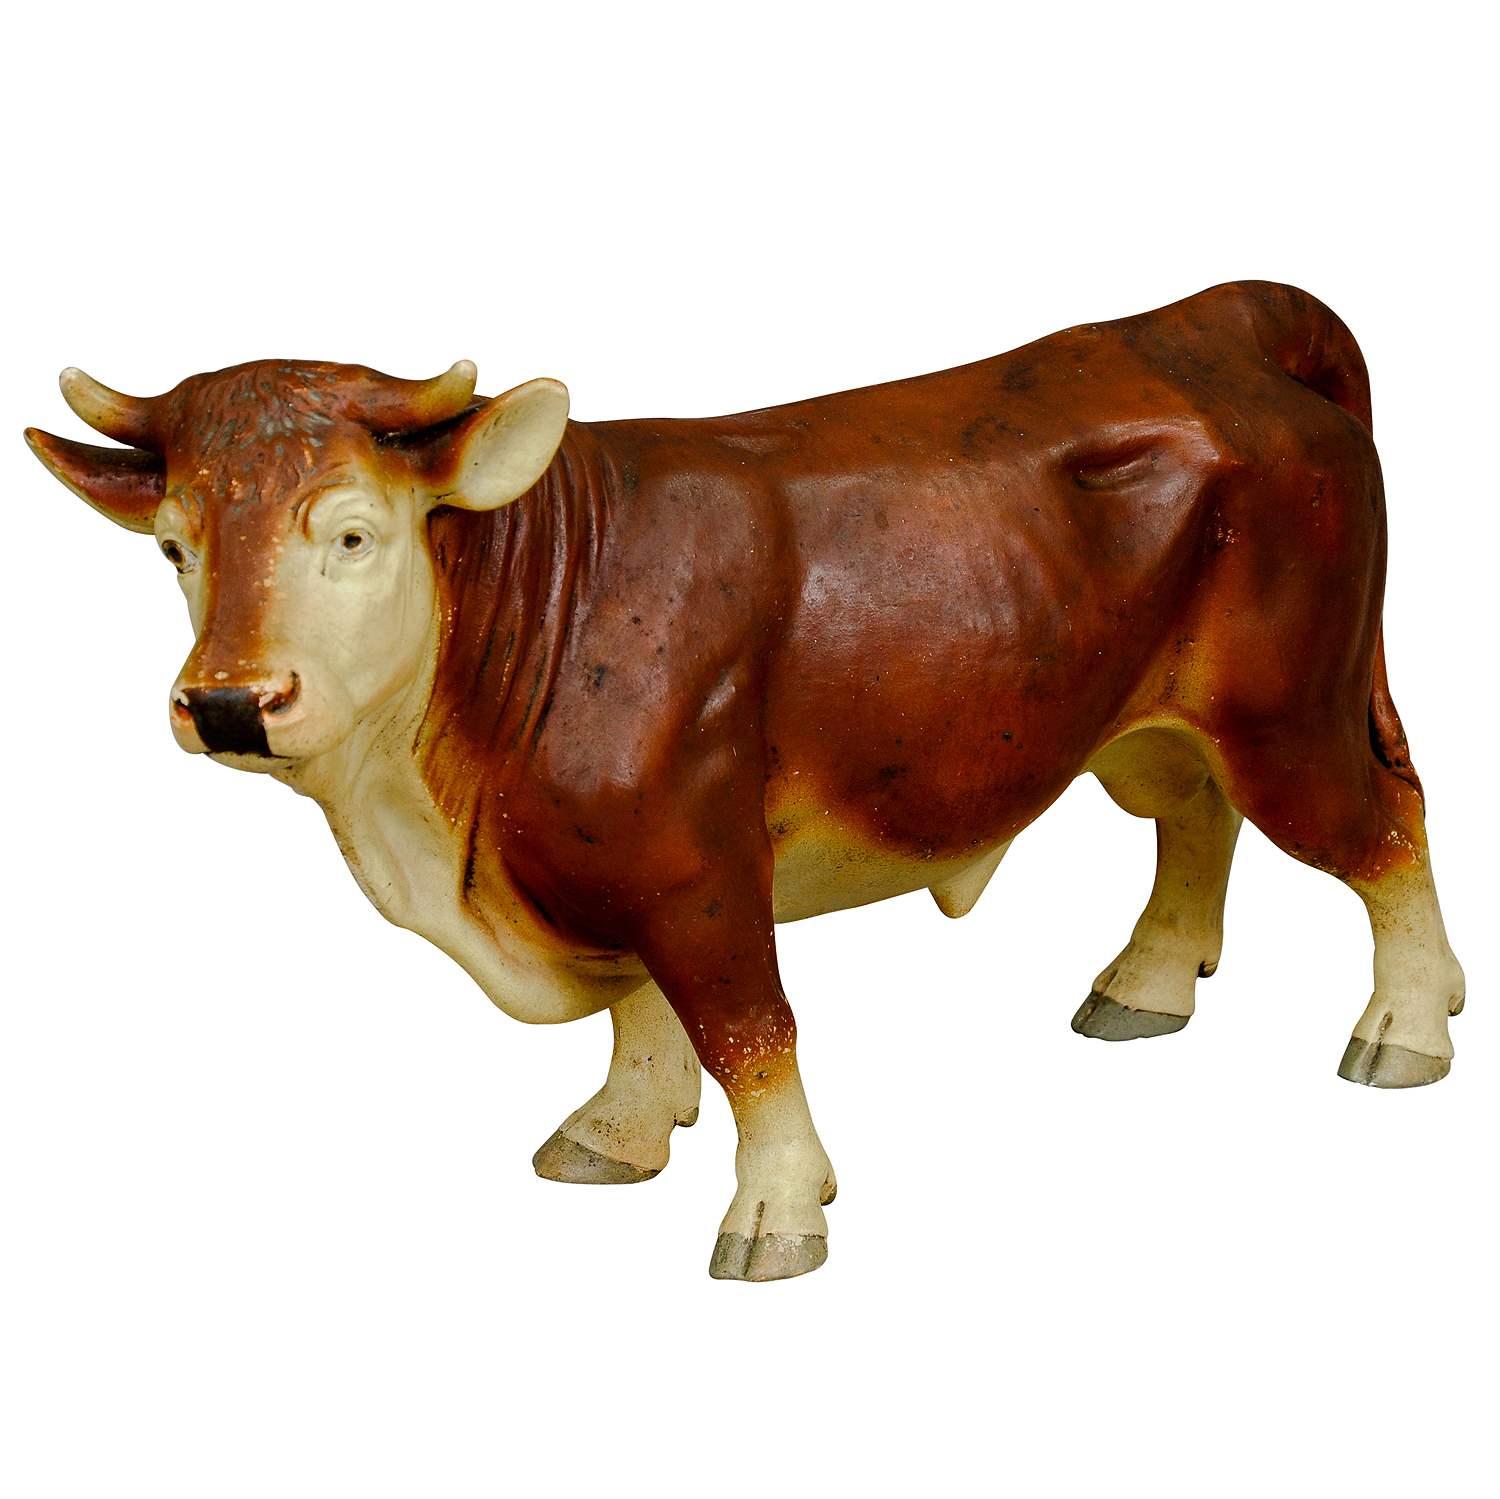 Antique Butchery Decoration of a Pottery Ox

A large statue of an ox made of painted pottery. It was used as shop window decoration in a German butchery. The statue was manufactured around 1940s.

artfour is an owner-managed trading company that